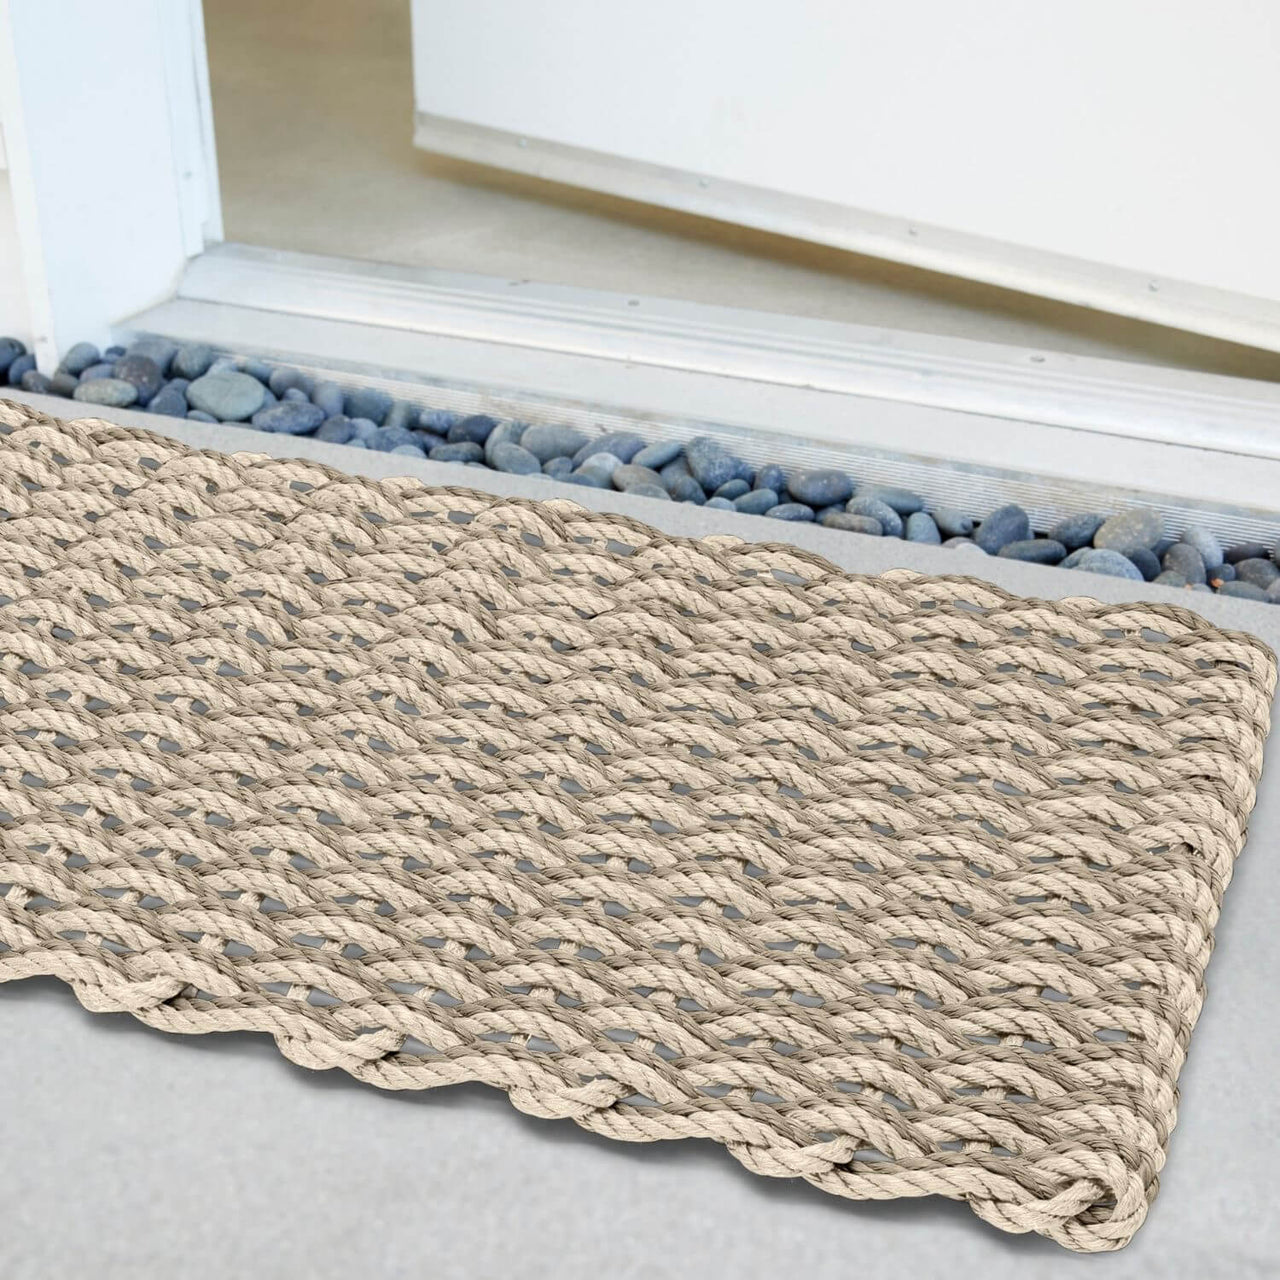 Double Weave Rope Mat – Maine Rope Mats